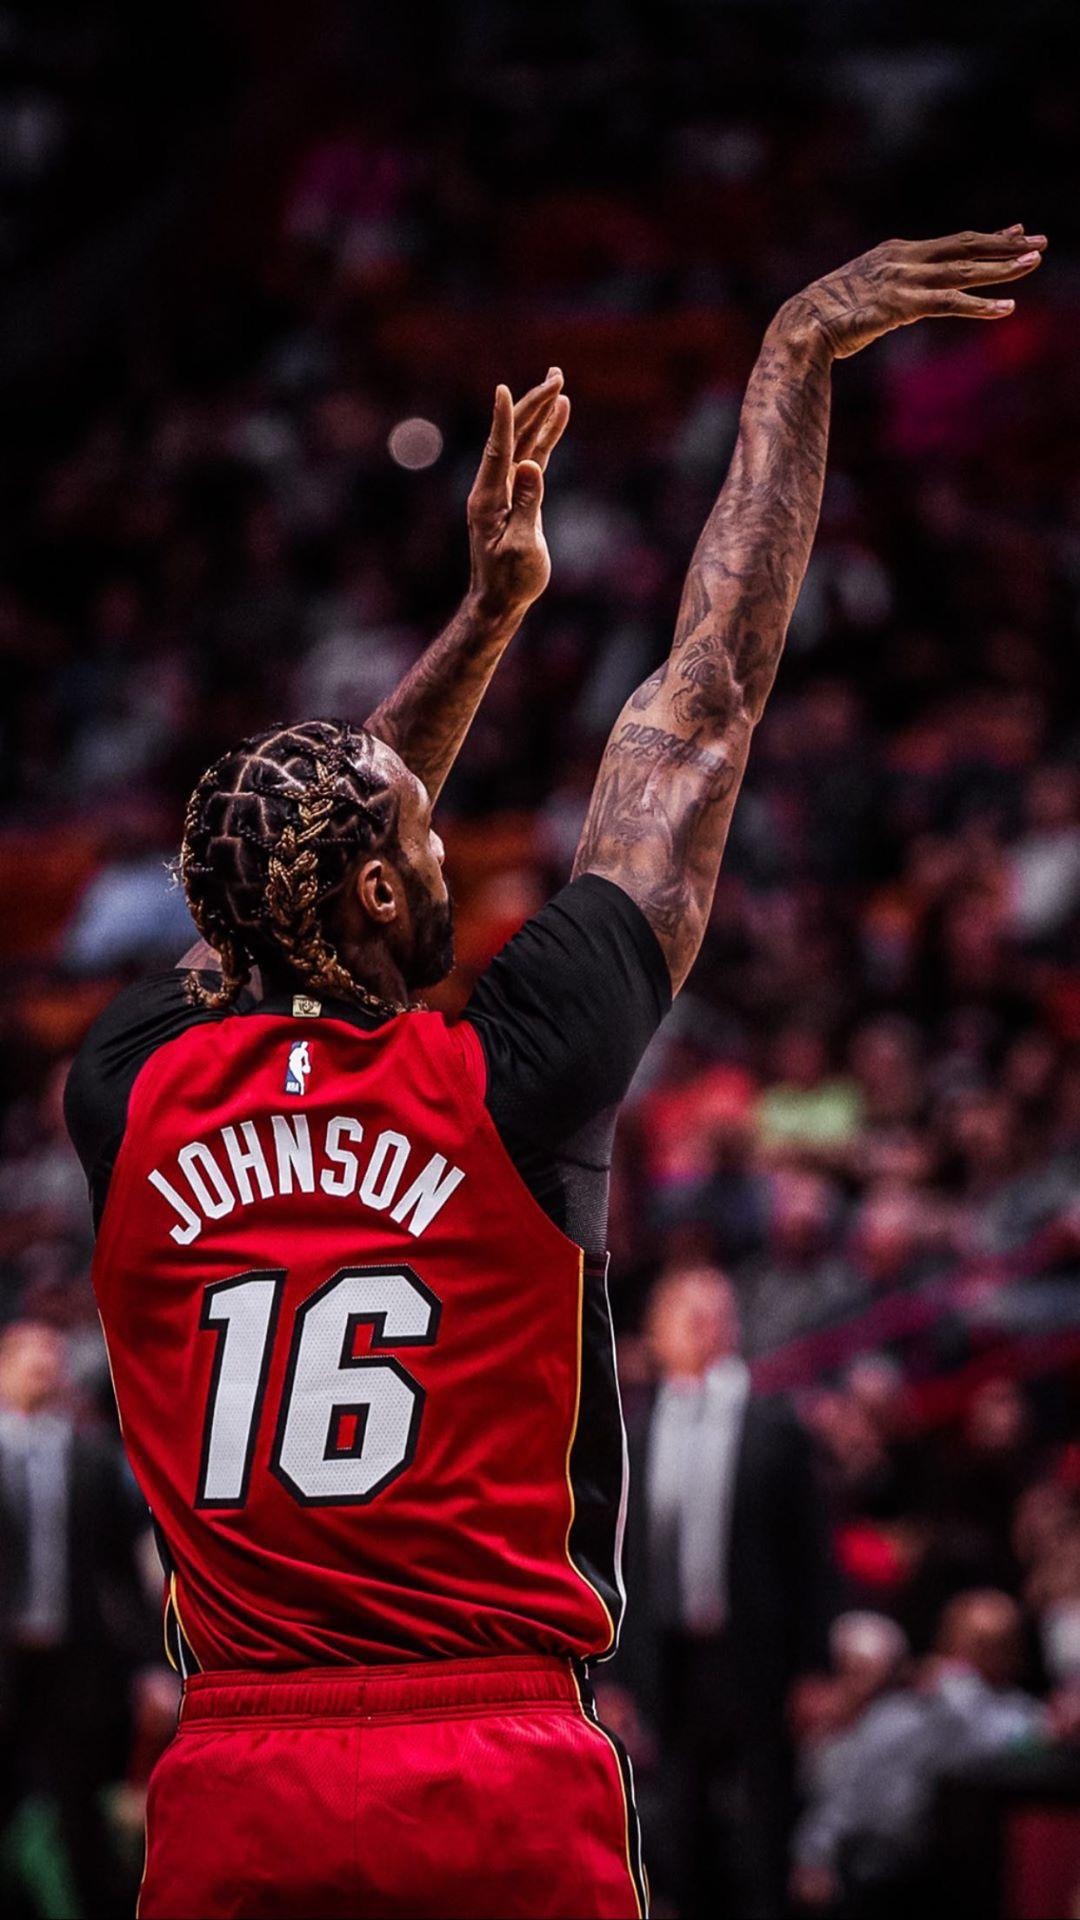 Miami Heat: James Johnson, The team made its first NBA Finals appearance in 2006. 1080x1920 Full HD Wallpaper.